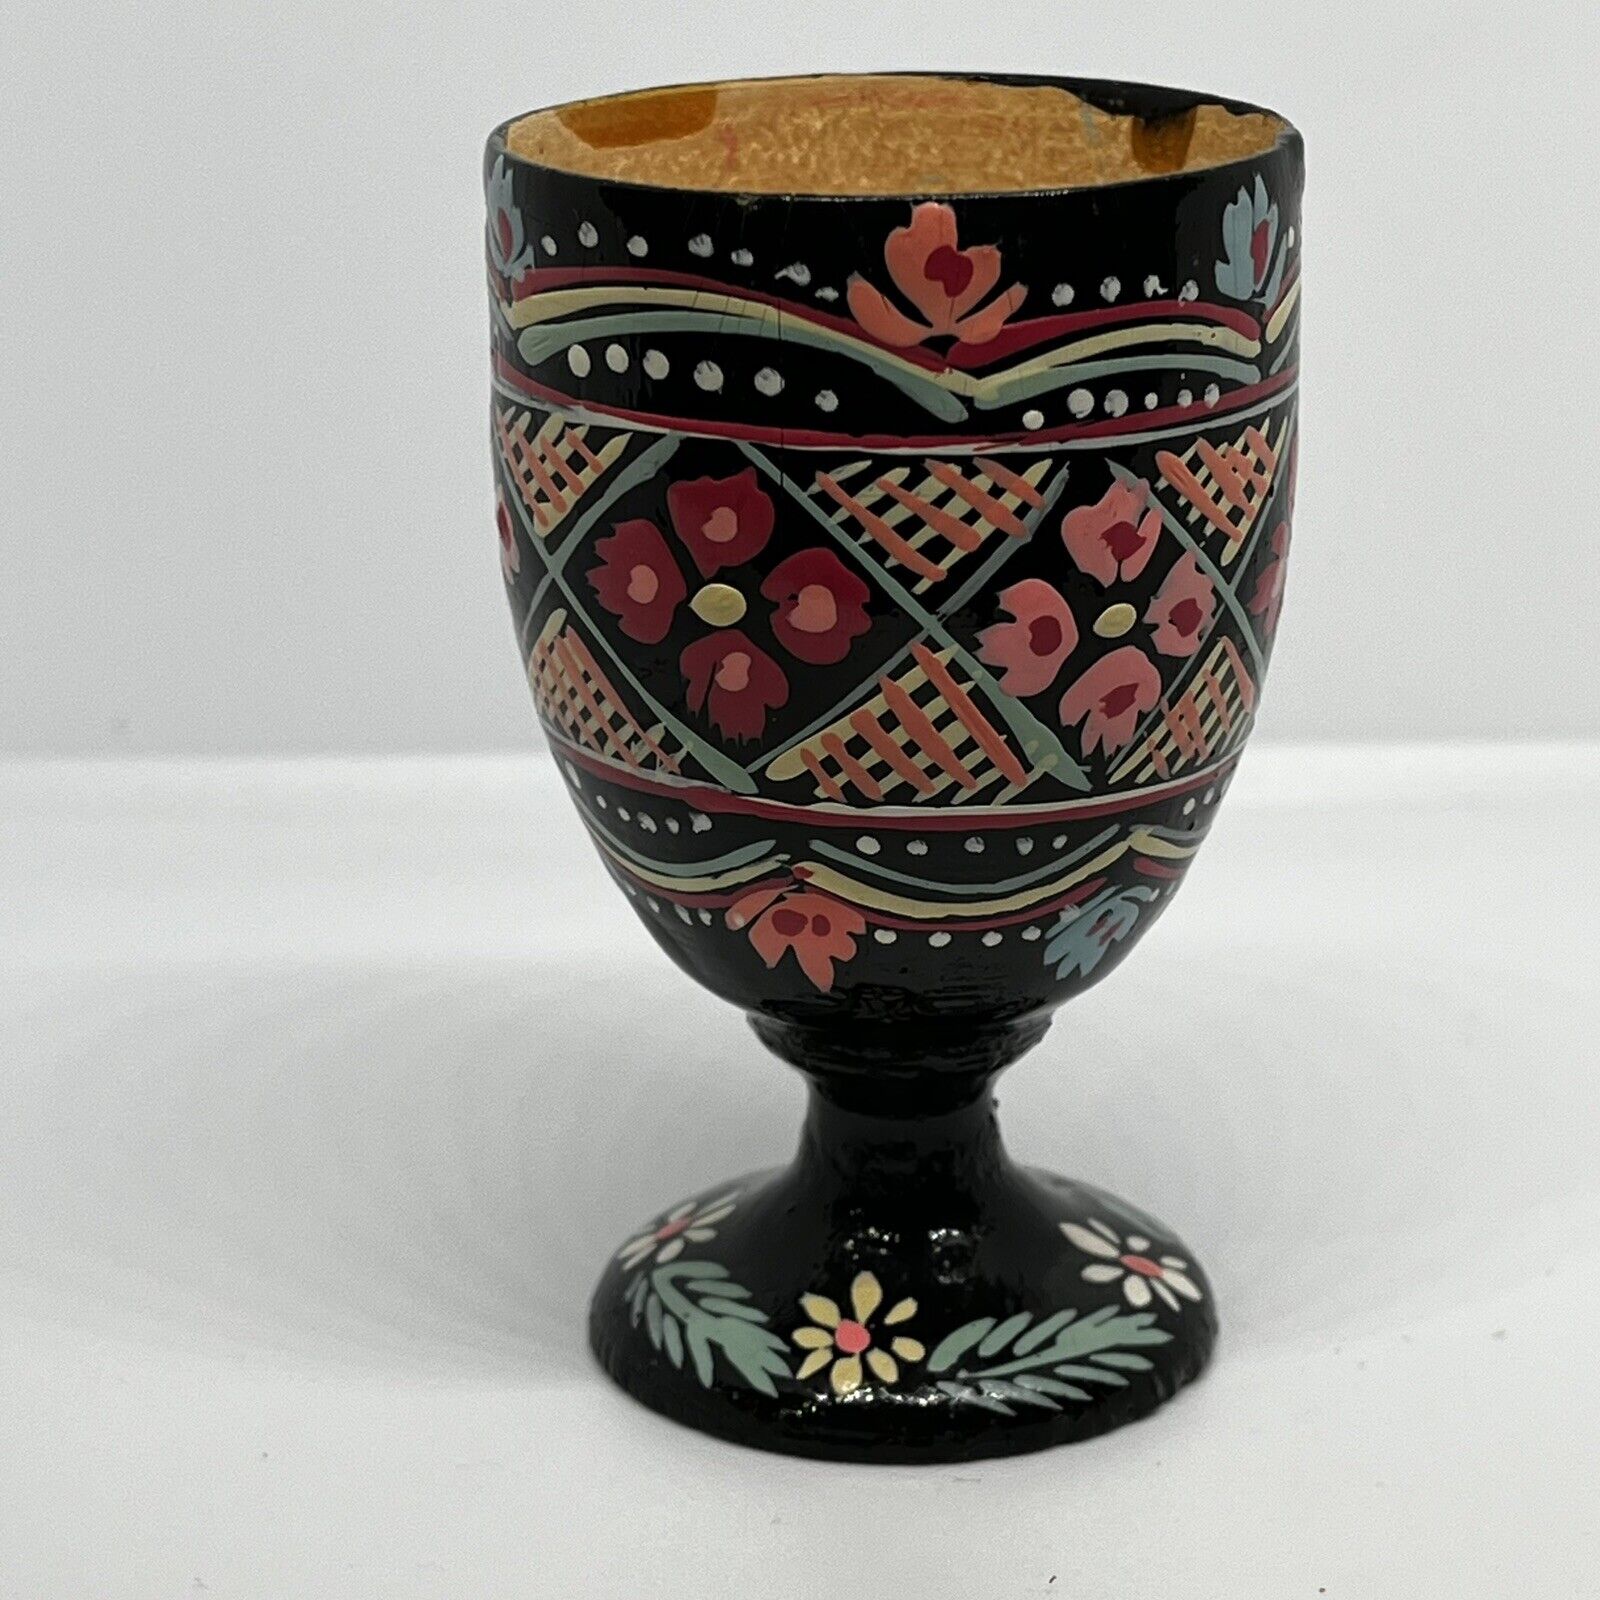 Vtg Russian Folk Art Wooden Egg Cup Hand Painted From USSR Days Multicolored